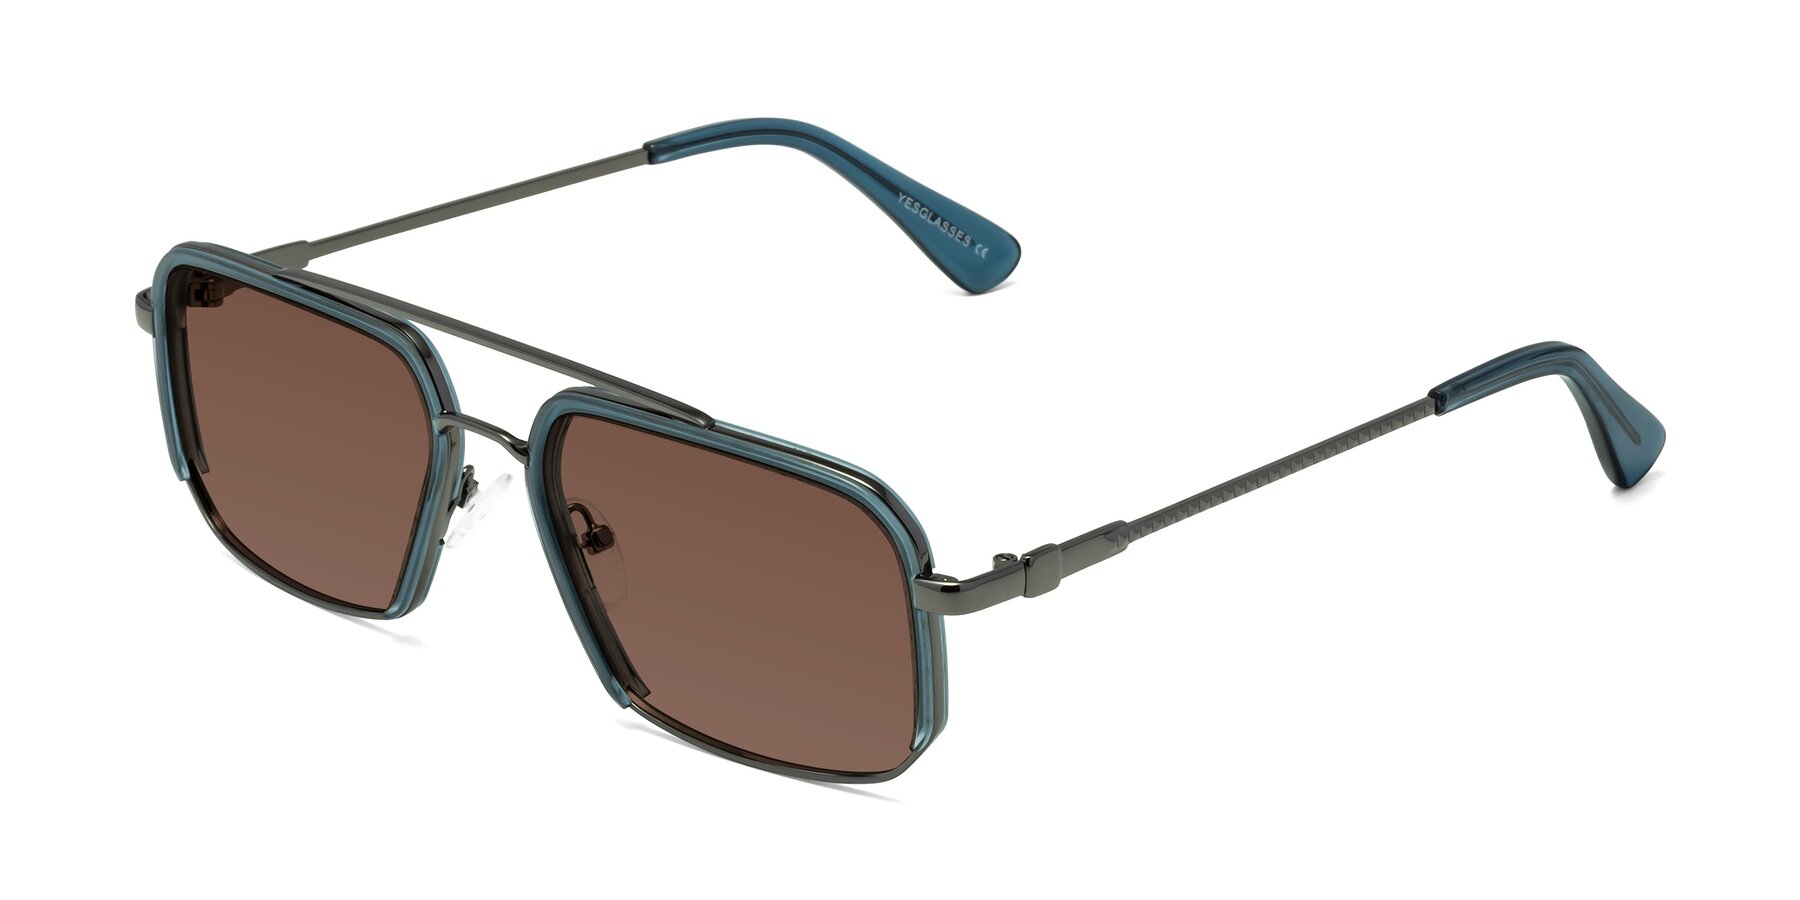 Angle of Dechter in Teal-Gunmetal with Brown Tinted Lenses